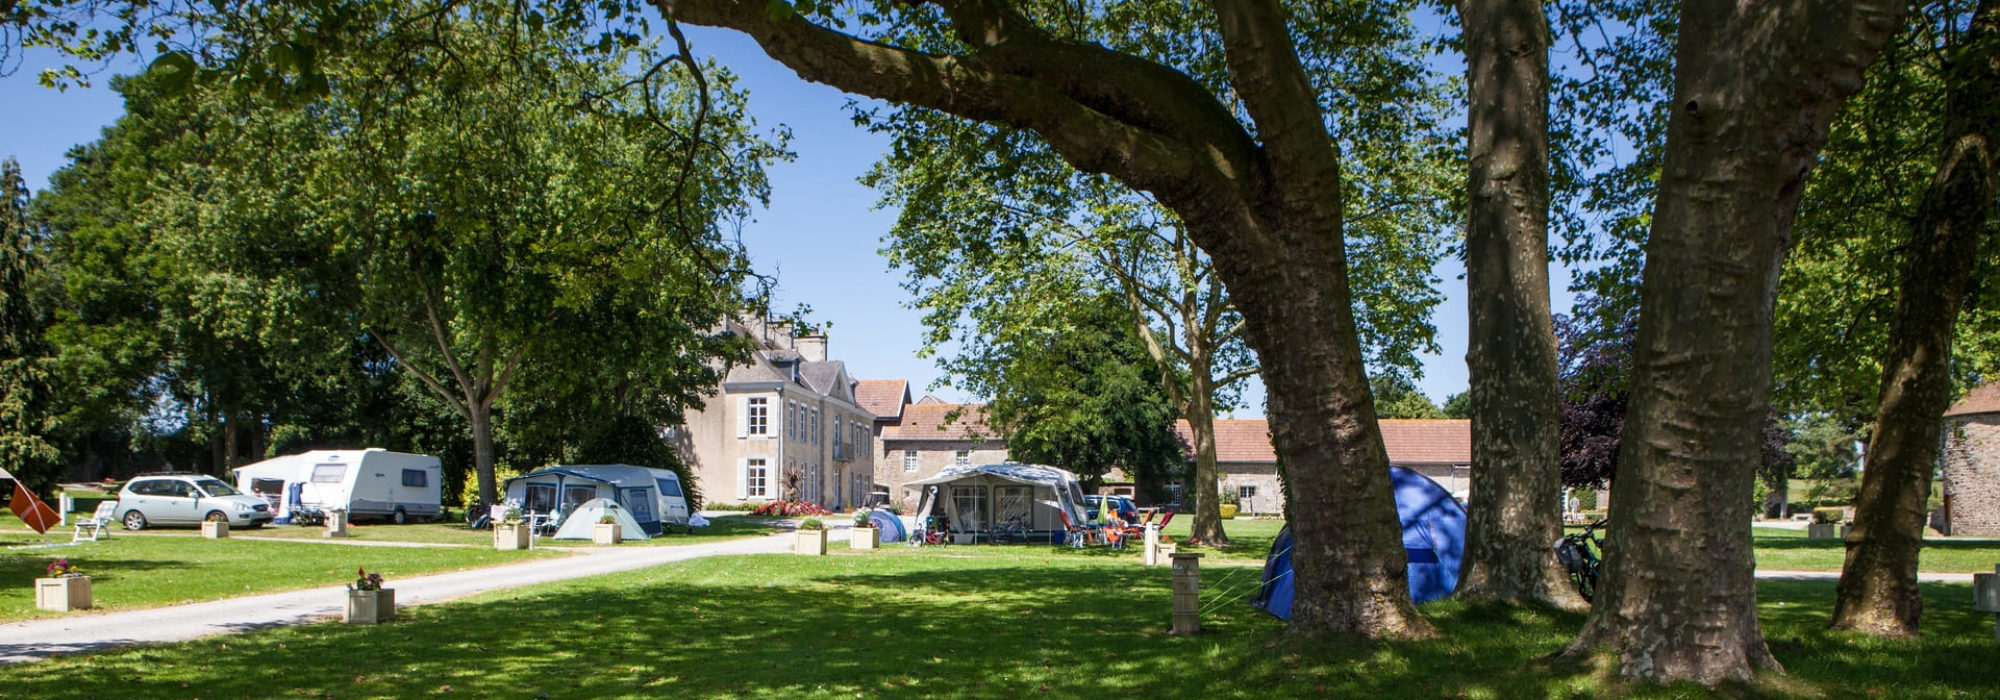 Camping in a Castle park